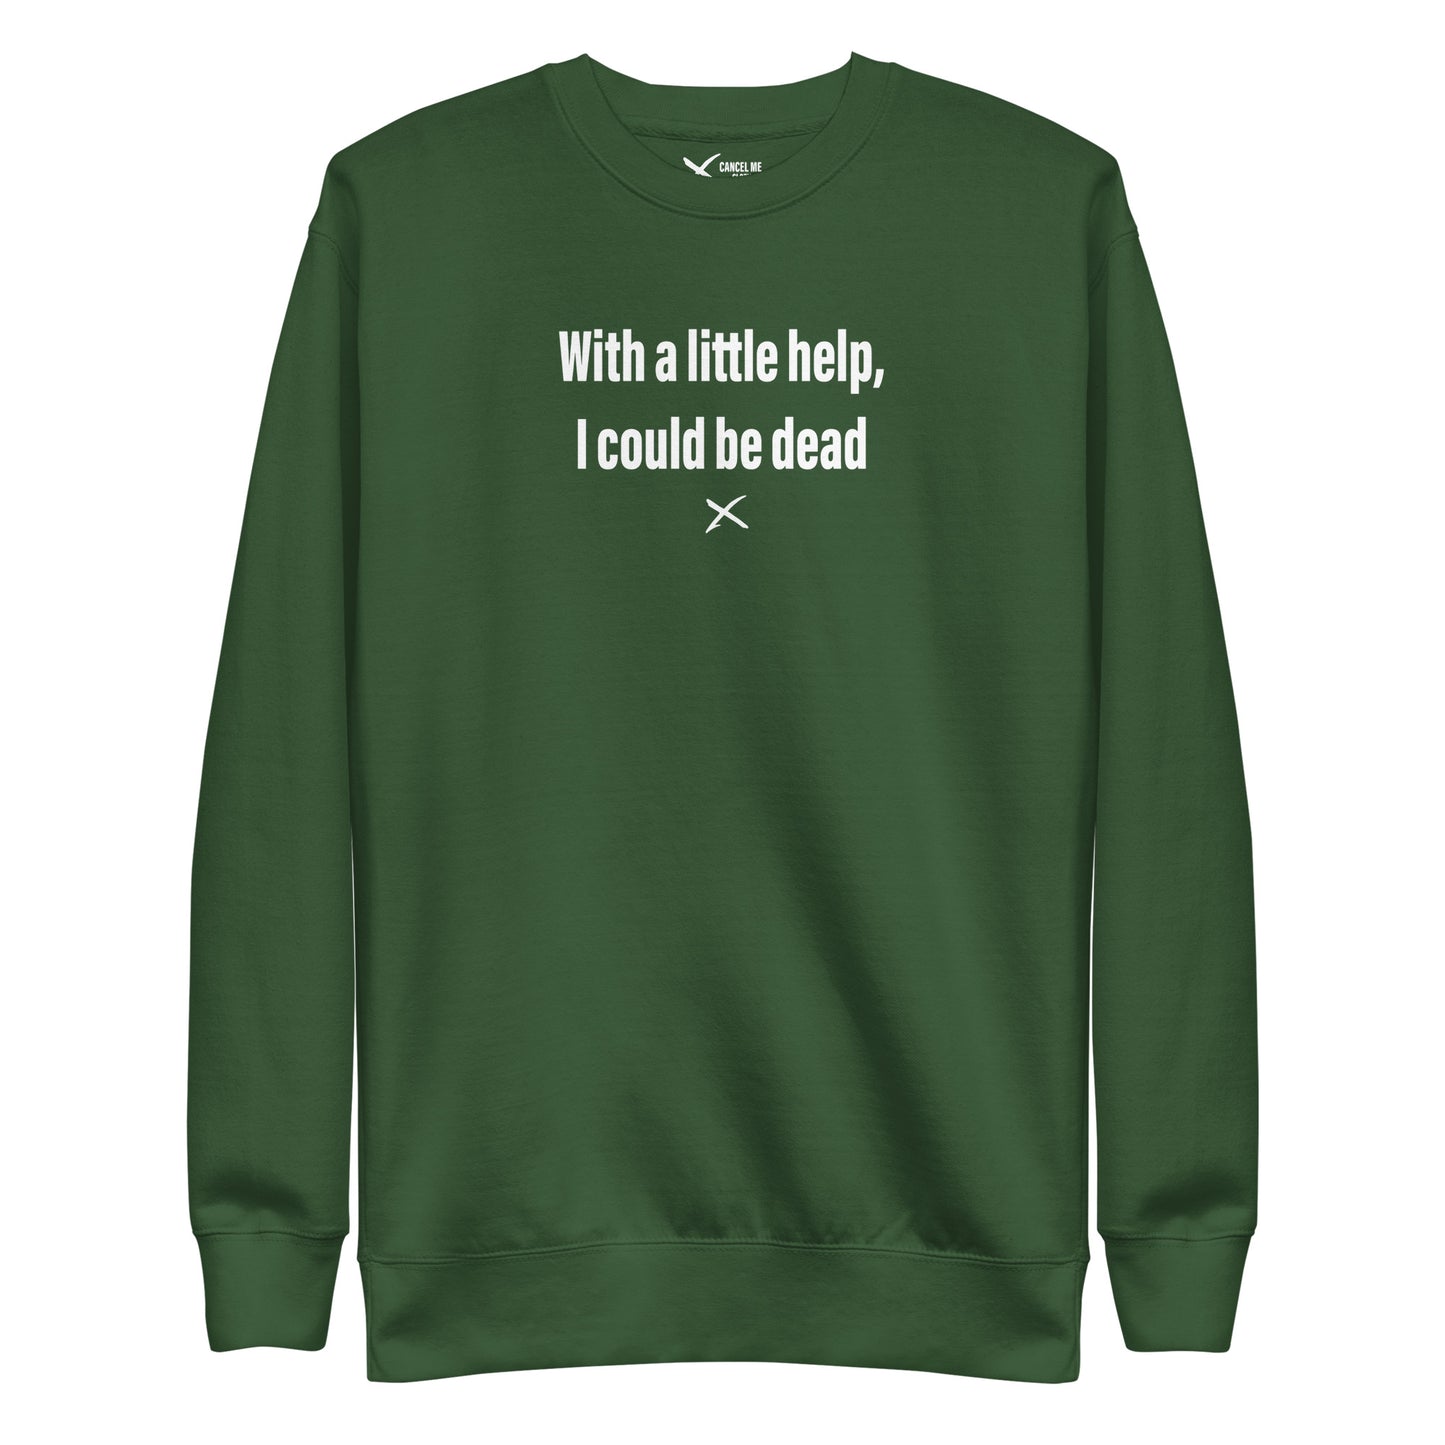 With a little help, I could be dead - Sweatshirt